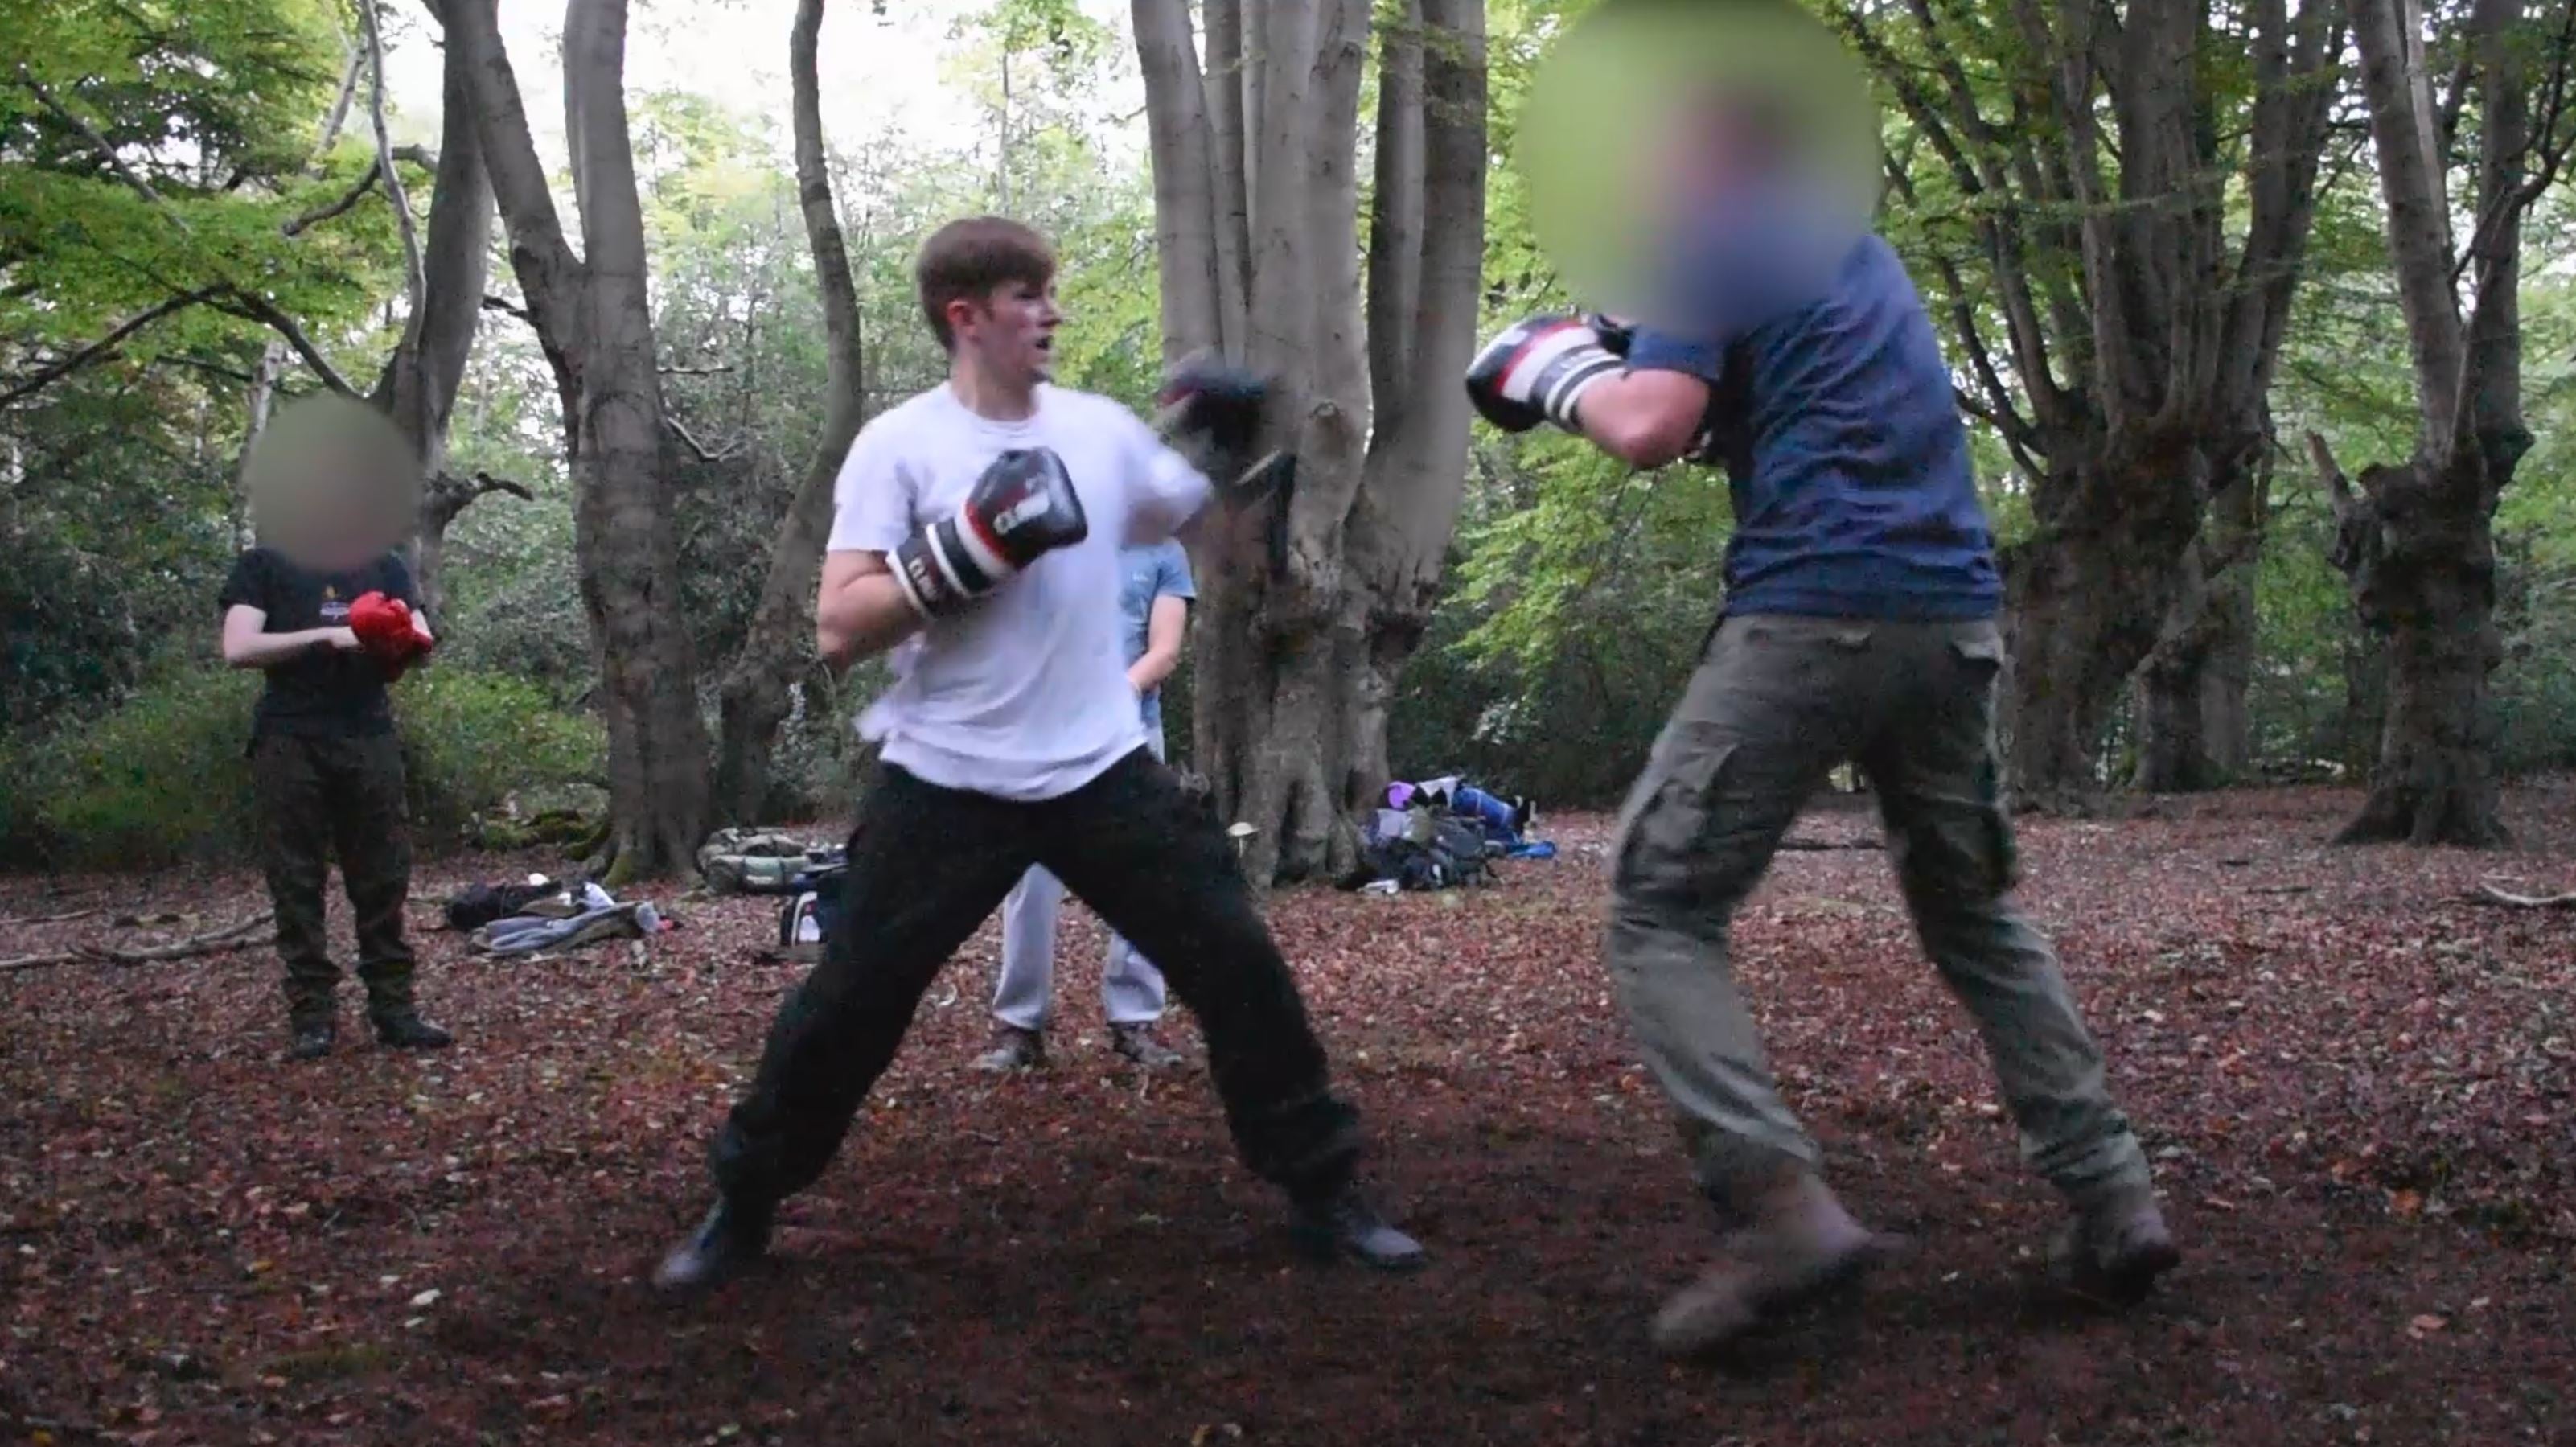 Benjamin Hannam, pictured here boxing outdoors, is now the first police officer to be convicted of belonging to a banned neo-Nazi terror group.